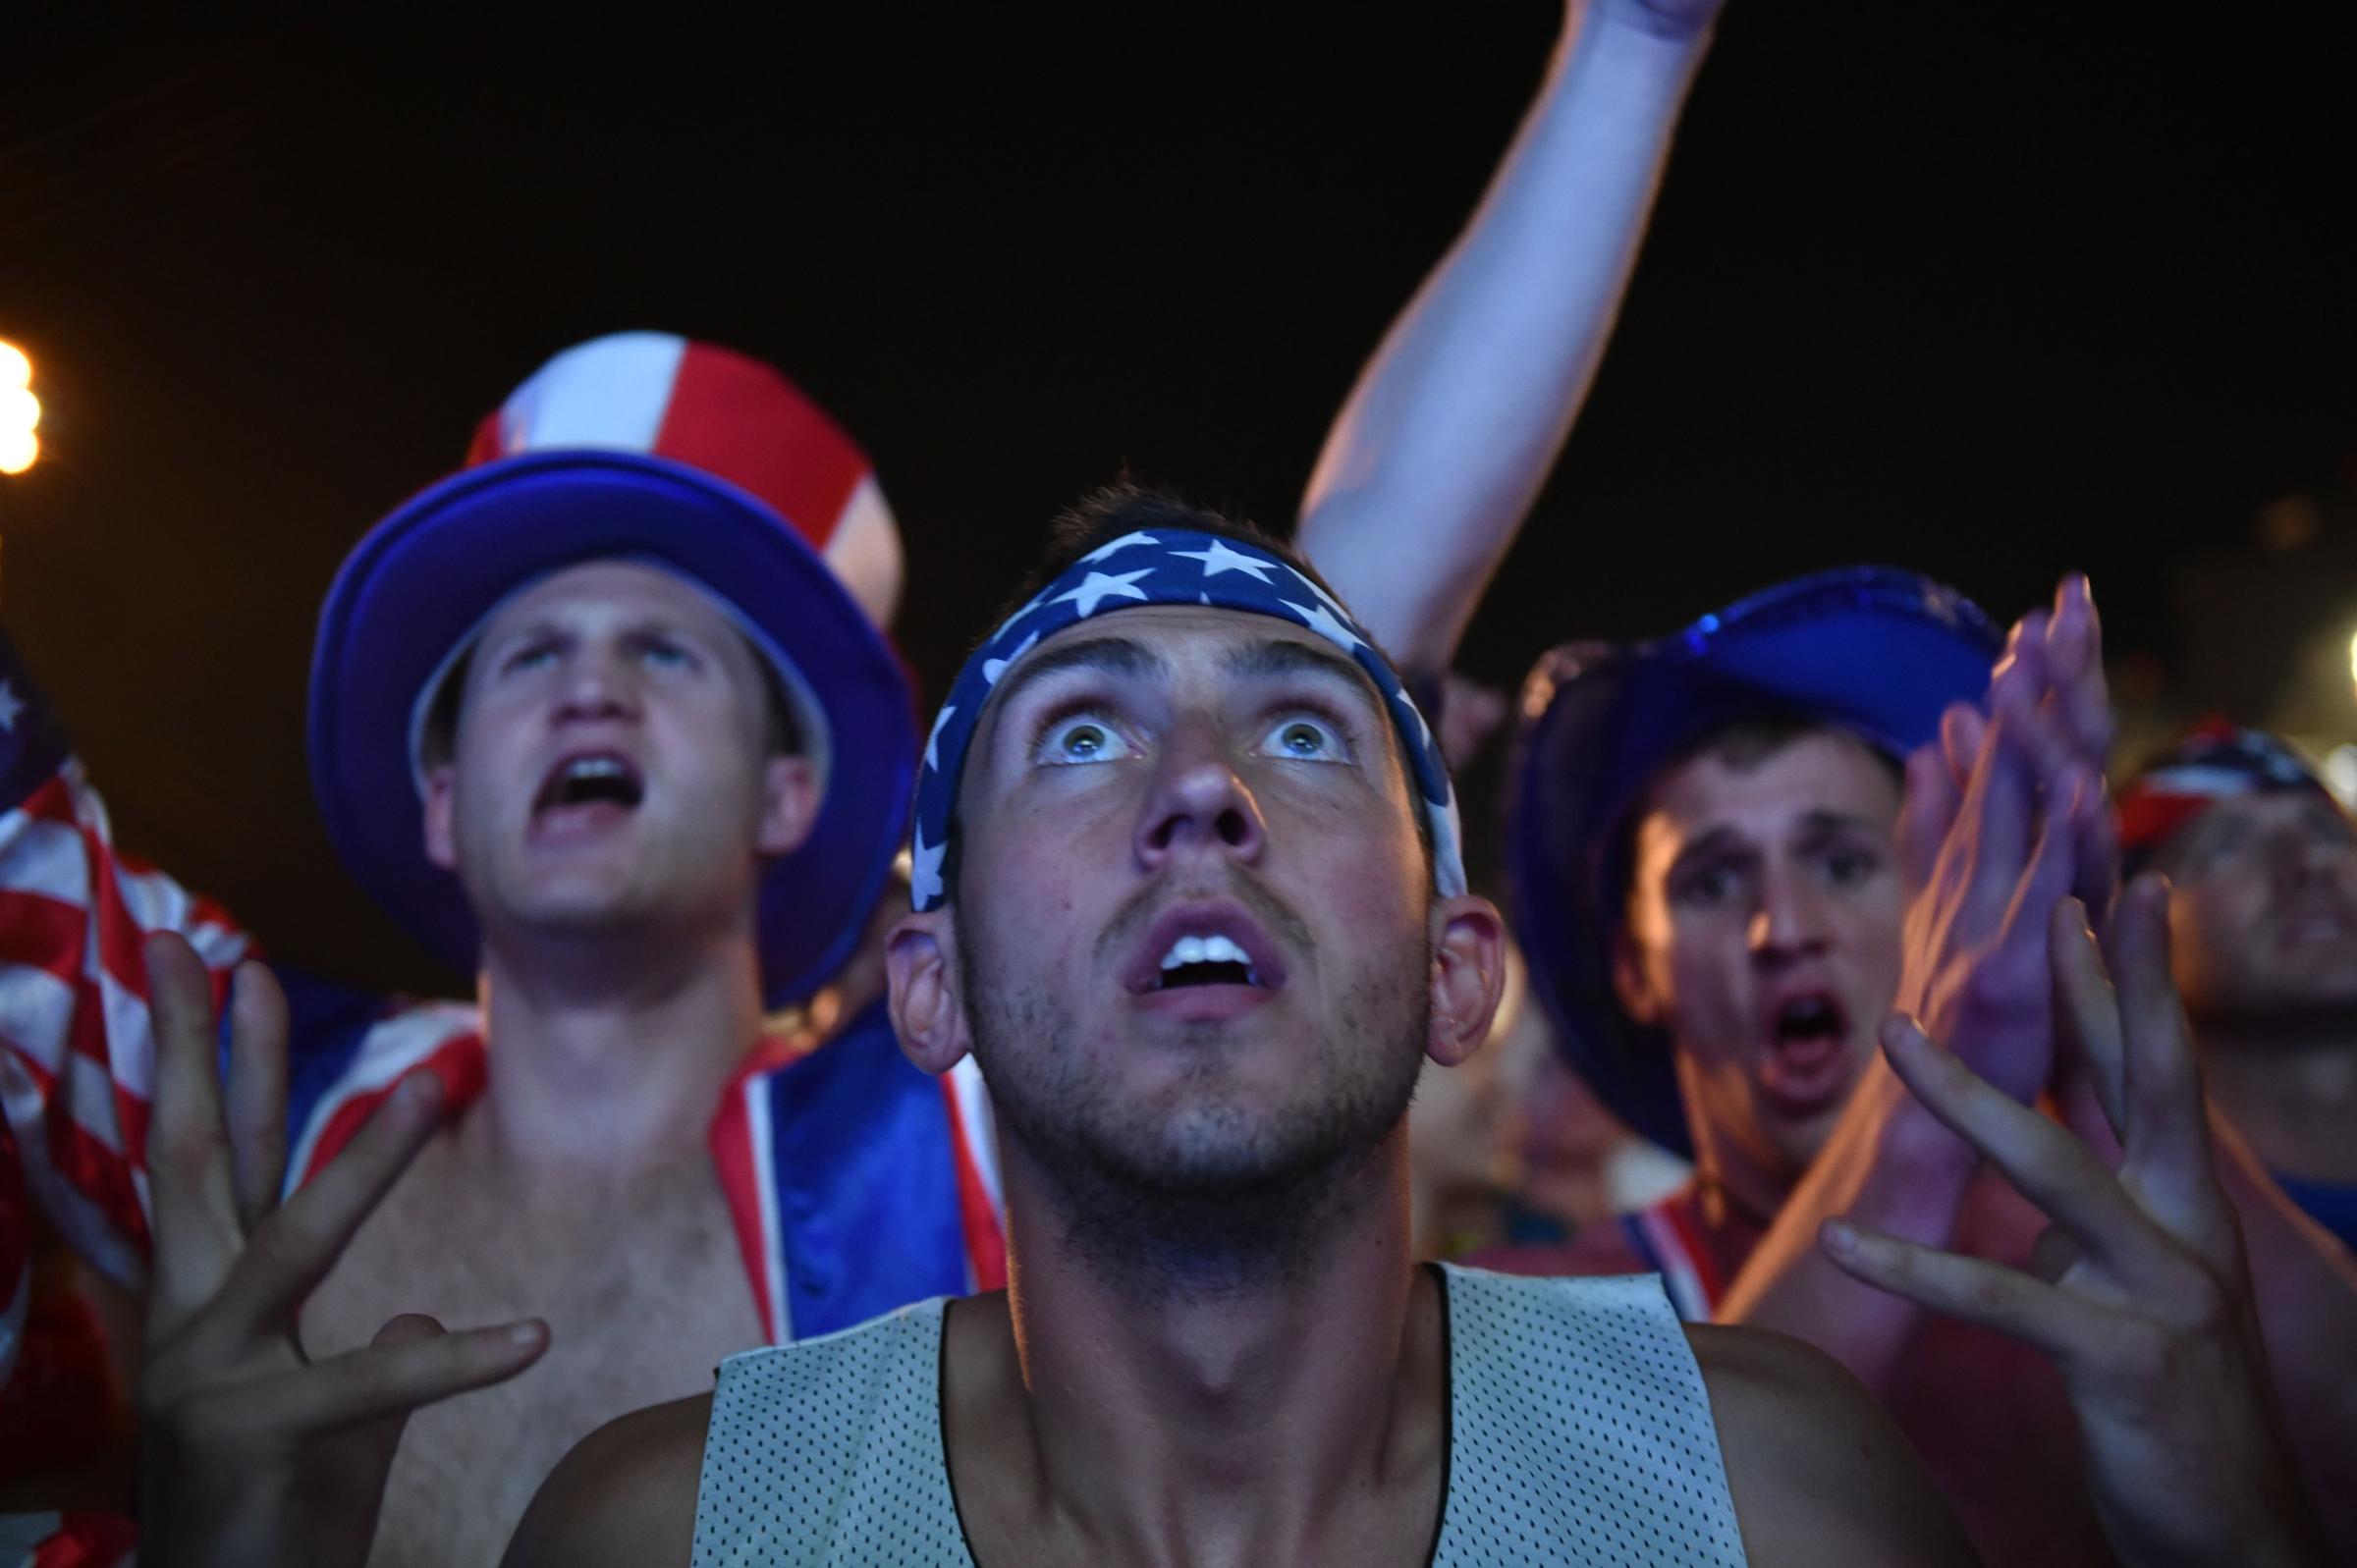 US fans watch a 2014 World Cup Group G football match USA vs Portugal on a giant screen in Rio de Janeiro, on June 22, 2014.